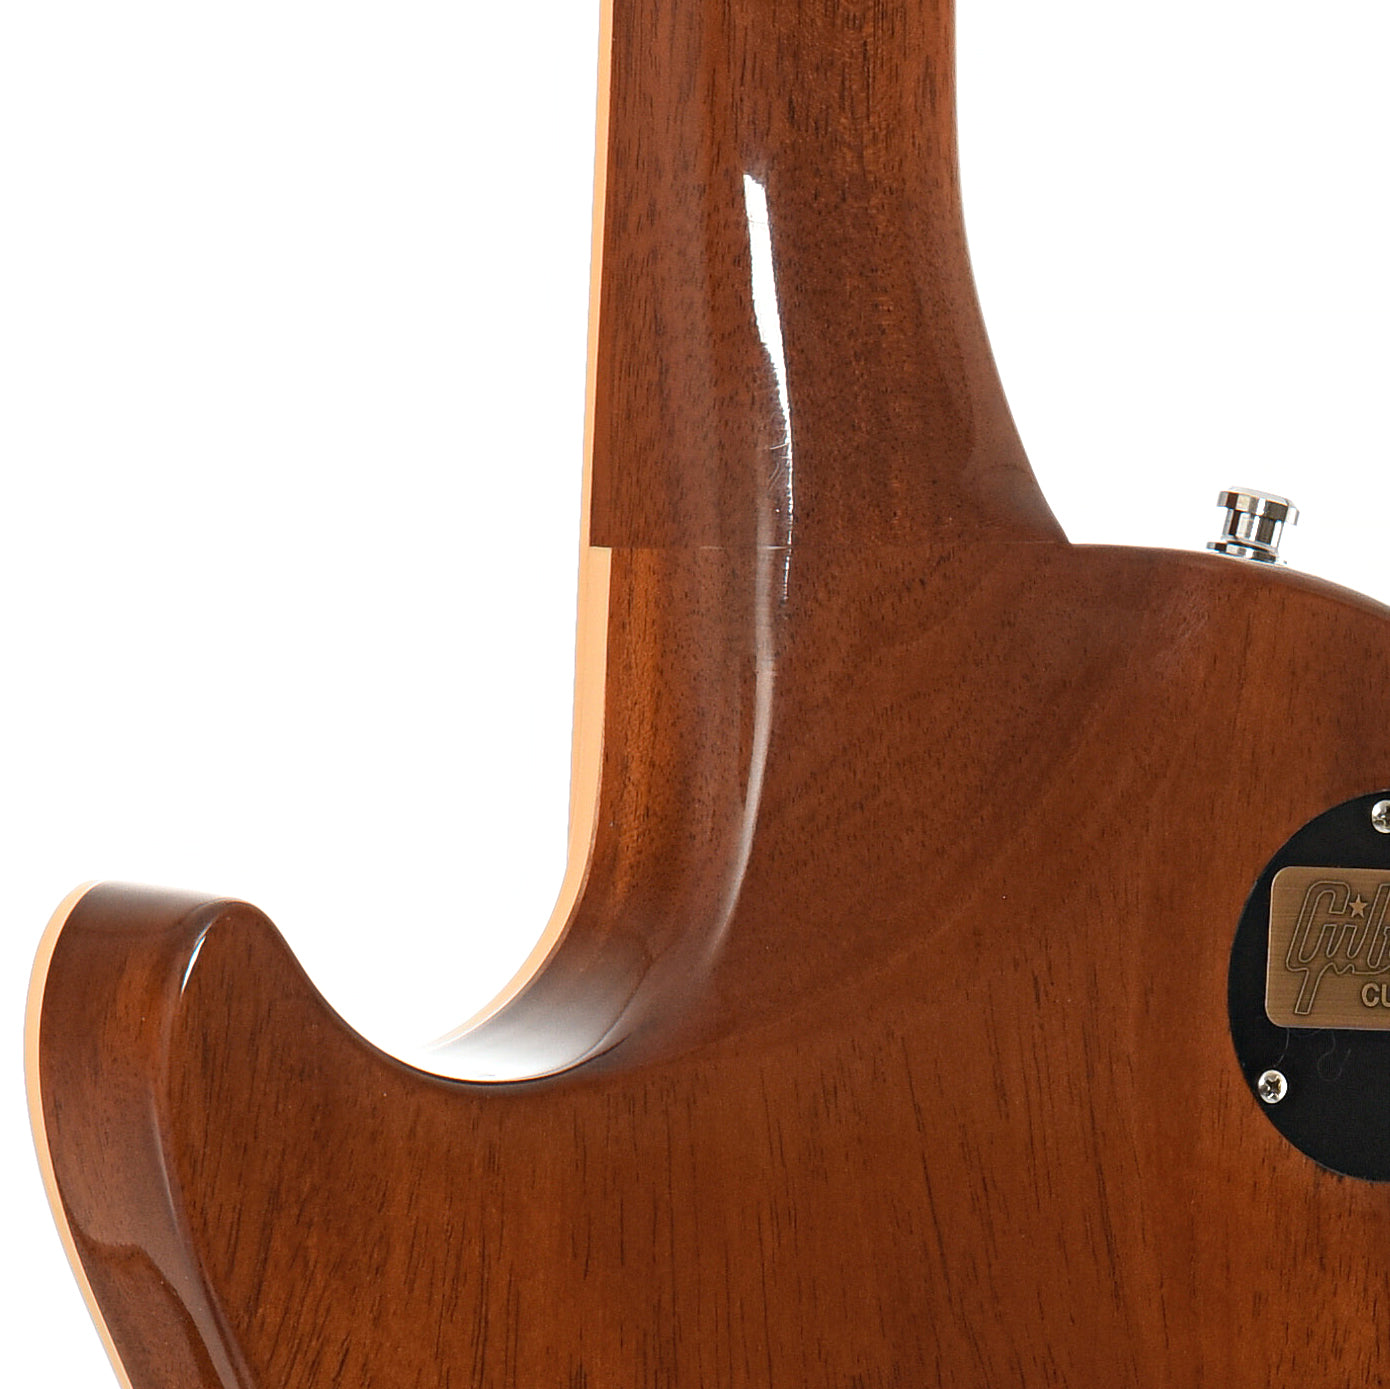 Neck joint of Gibson Alex Lifeson Les Paul Axcess Electric Guitar (2012)